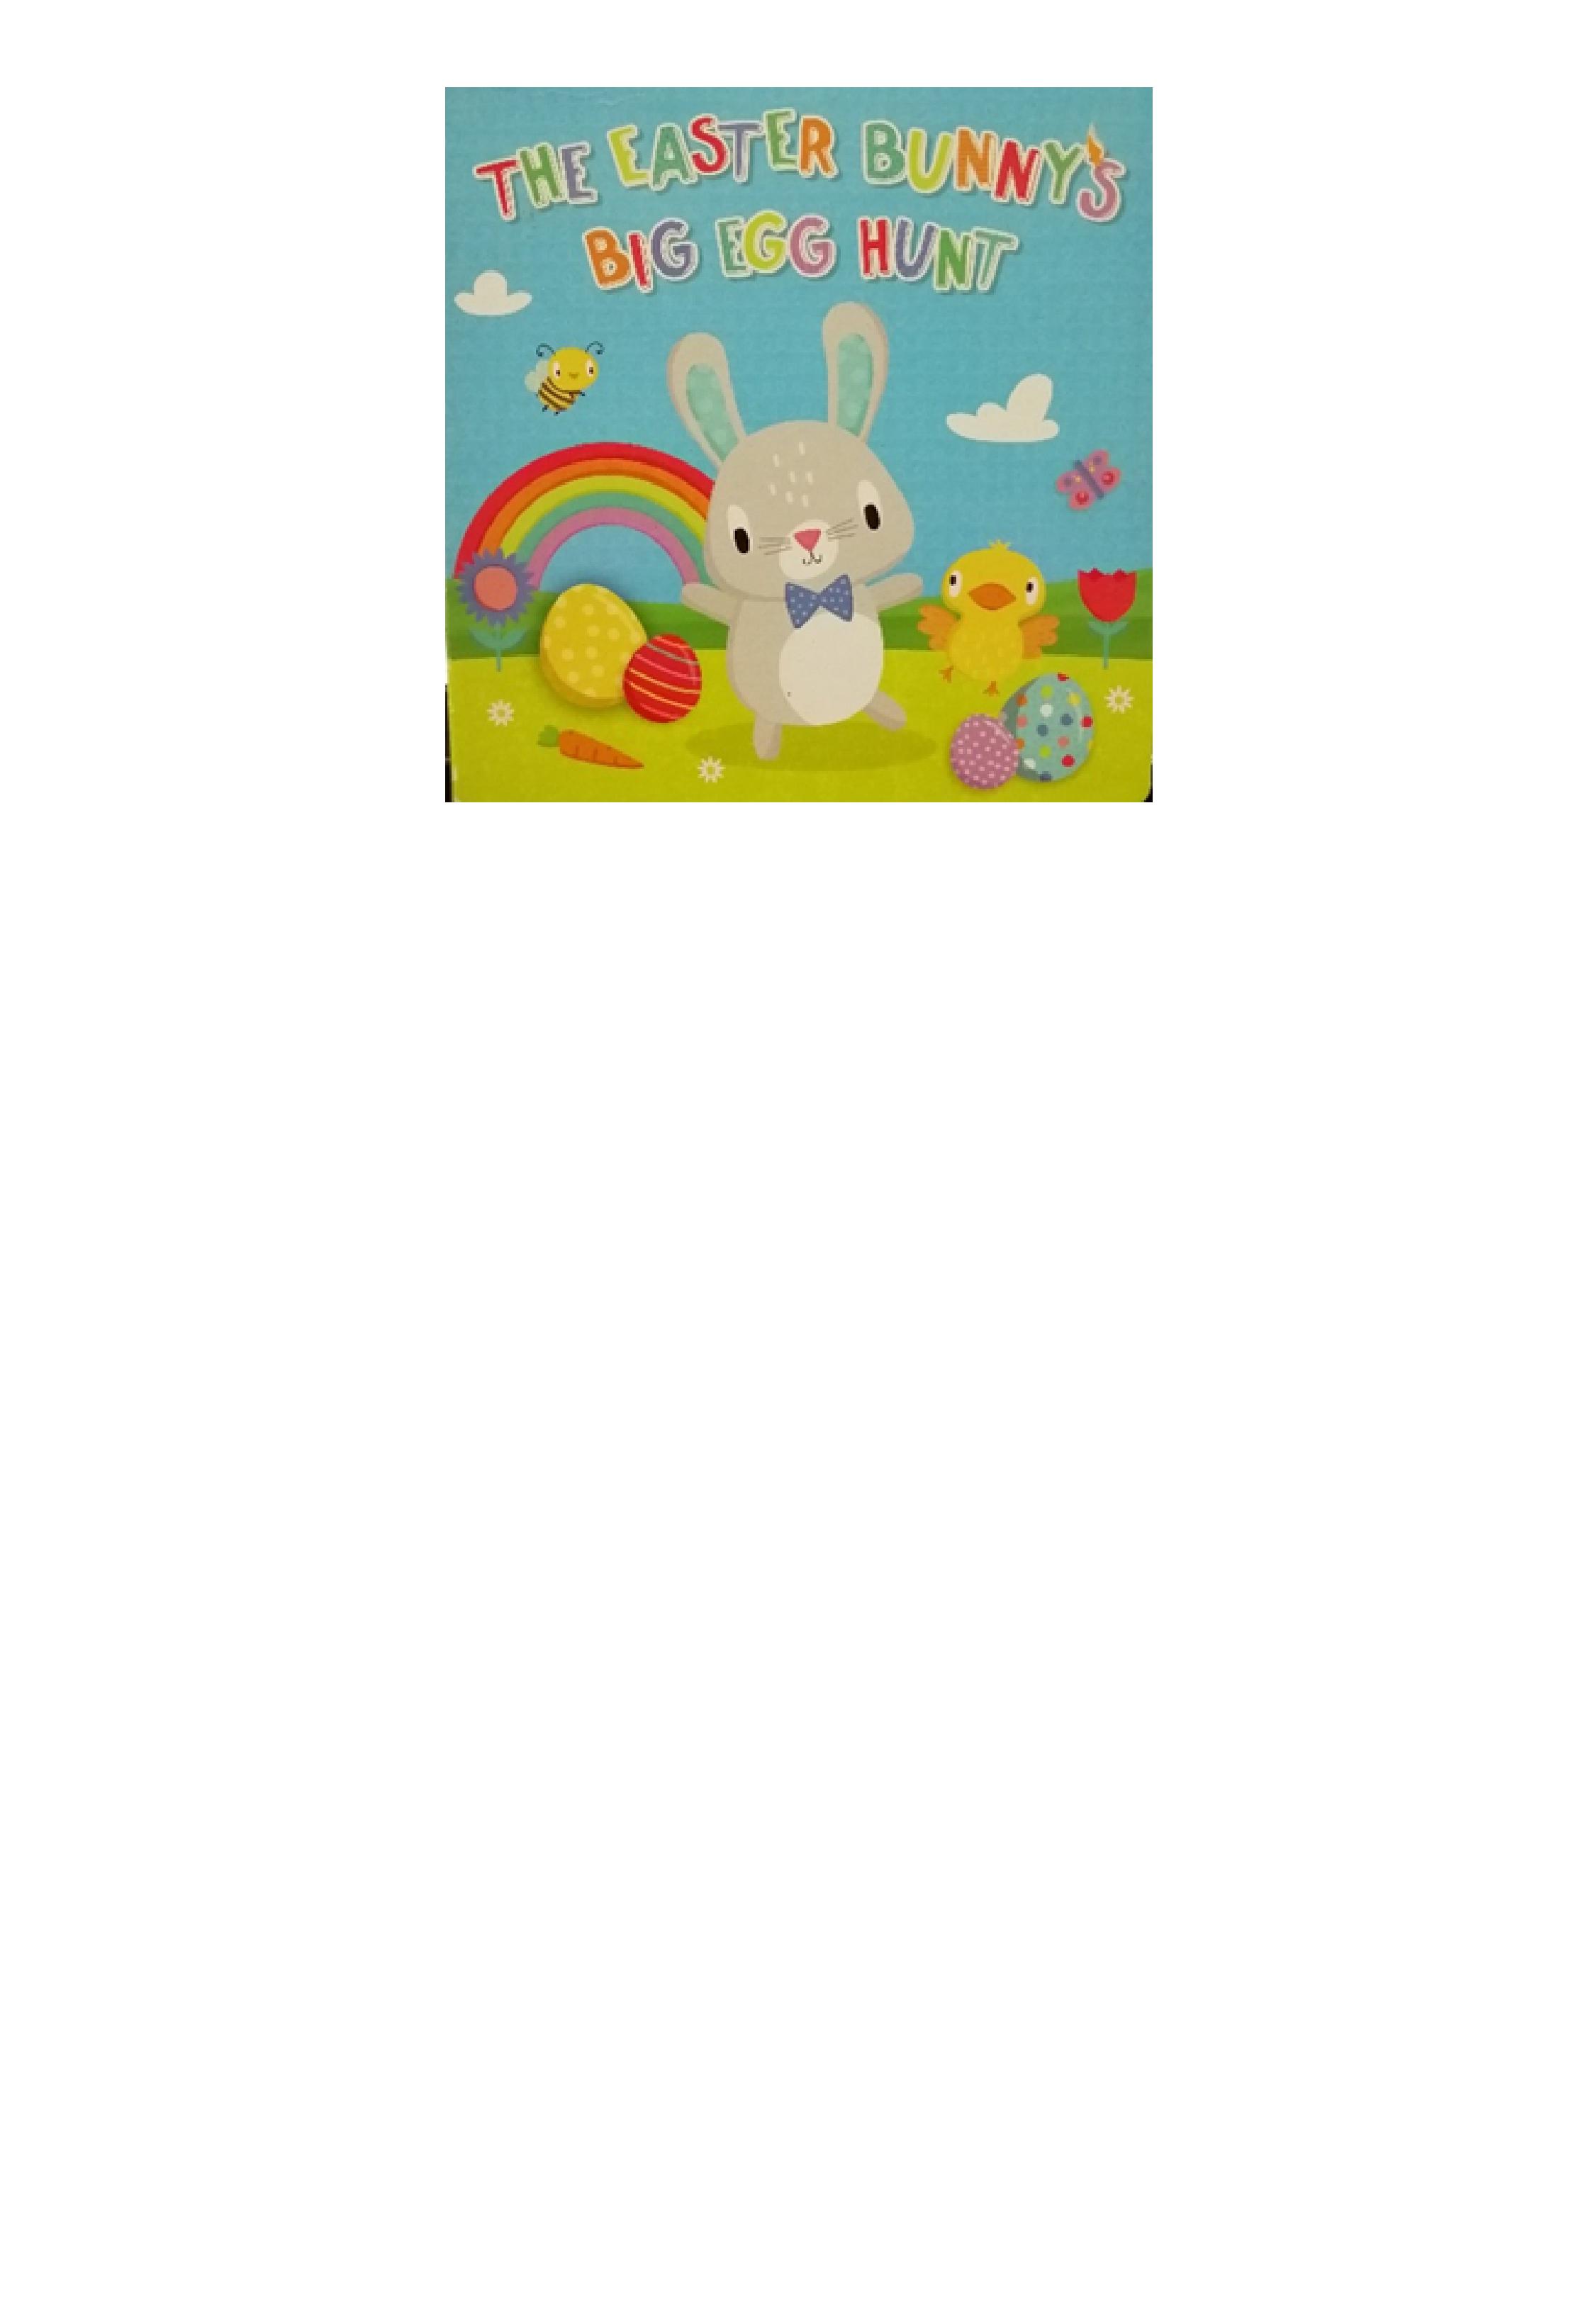 "It's storytime" - „The Easter Bunny’s big egg hunt” 